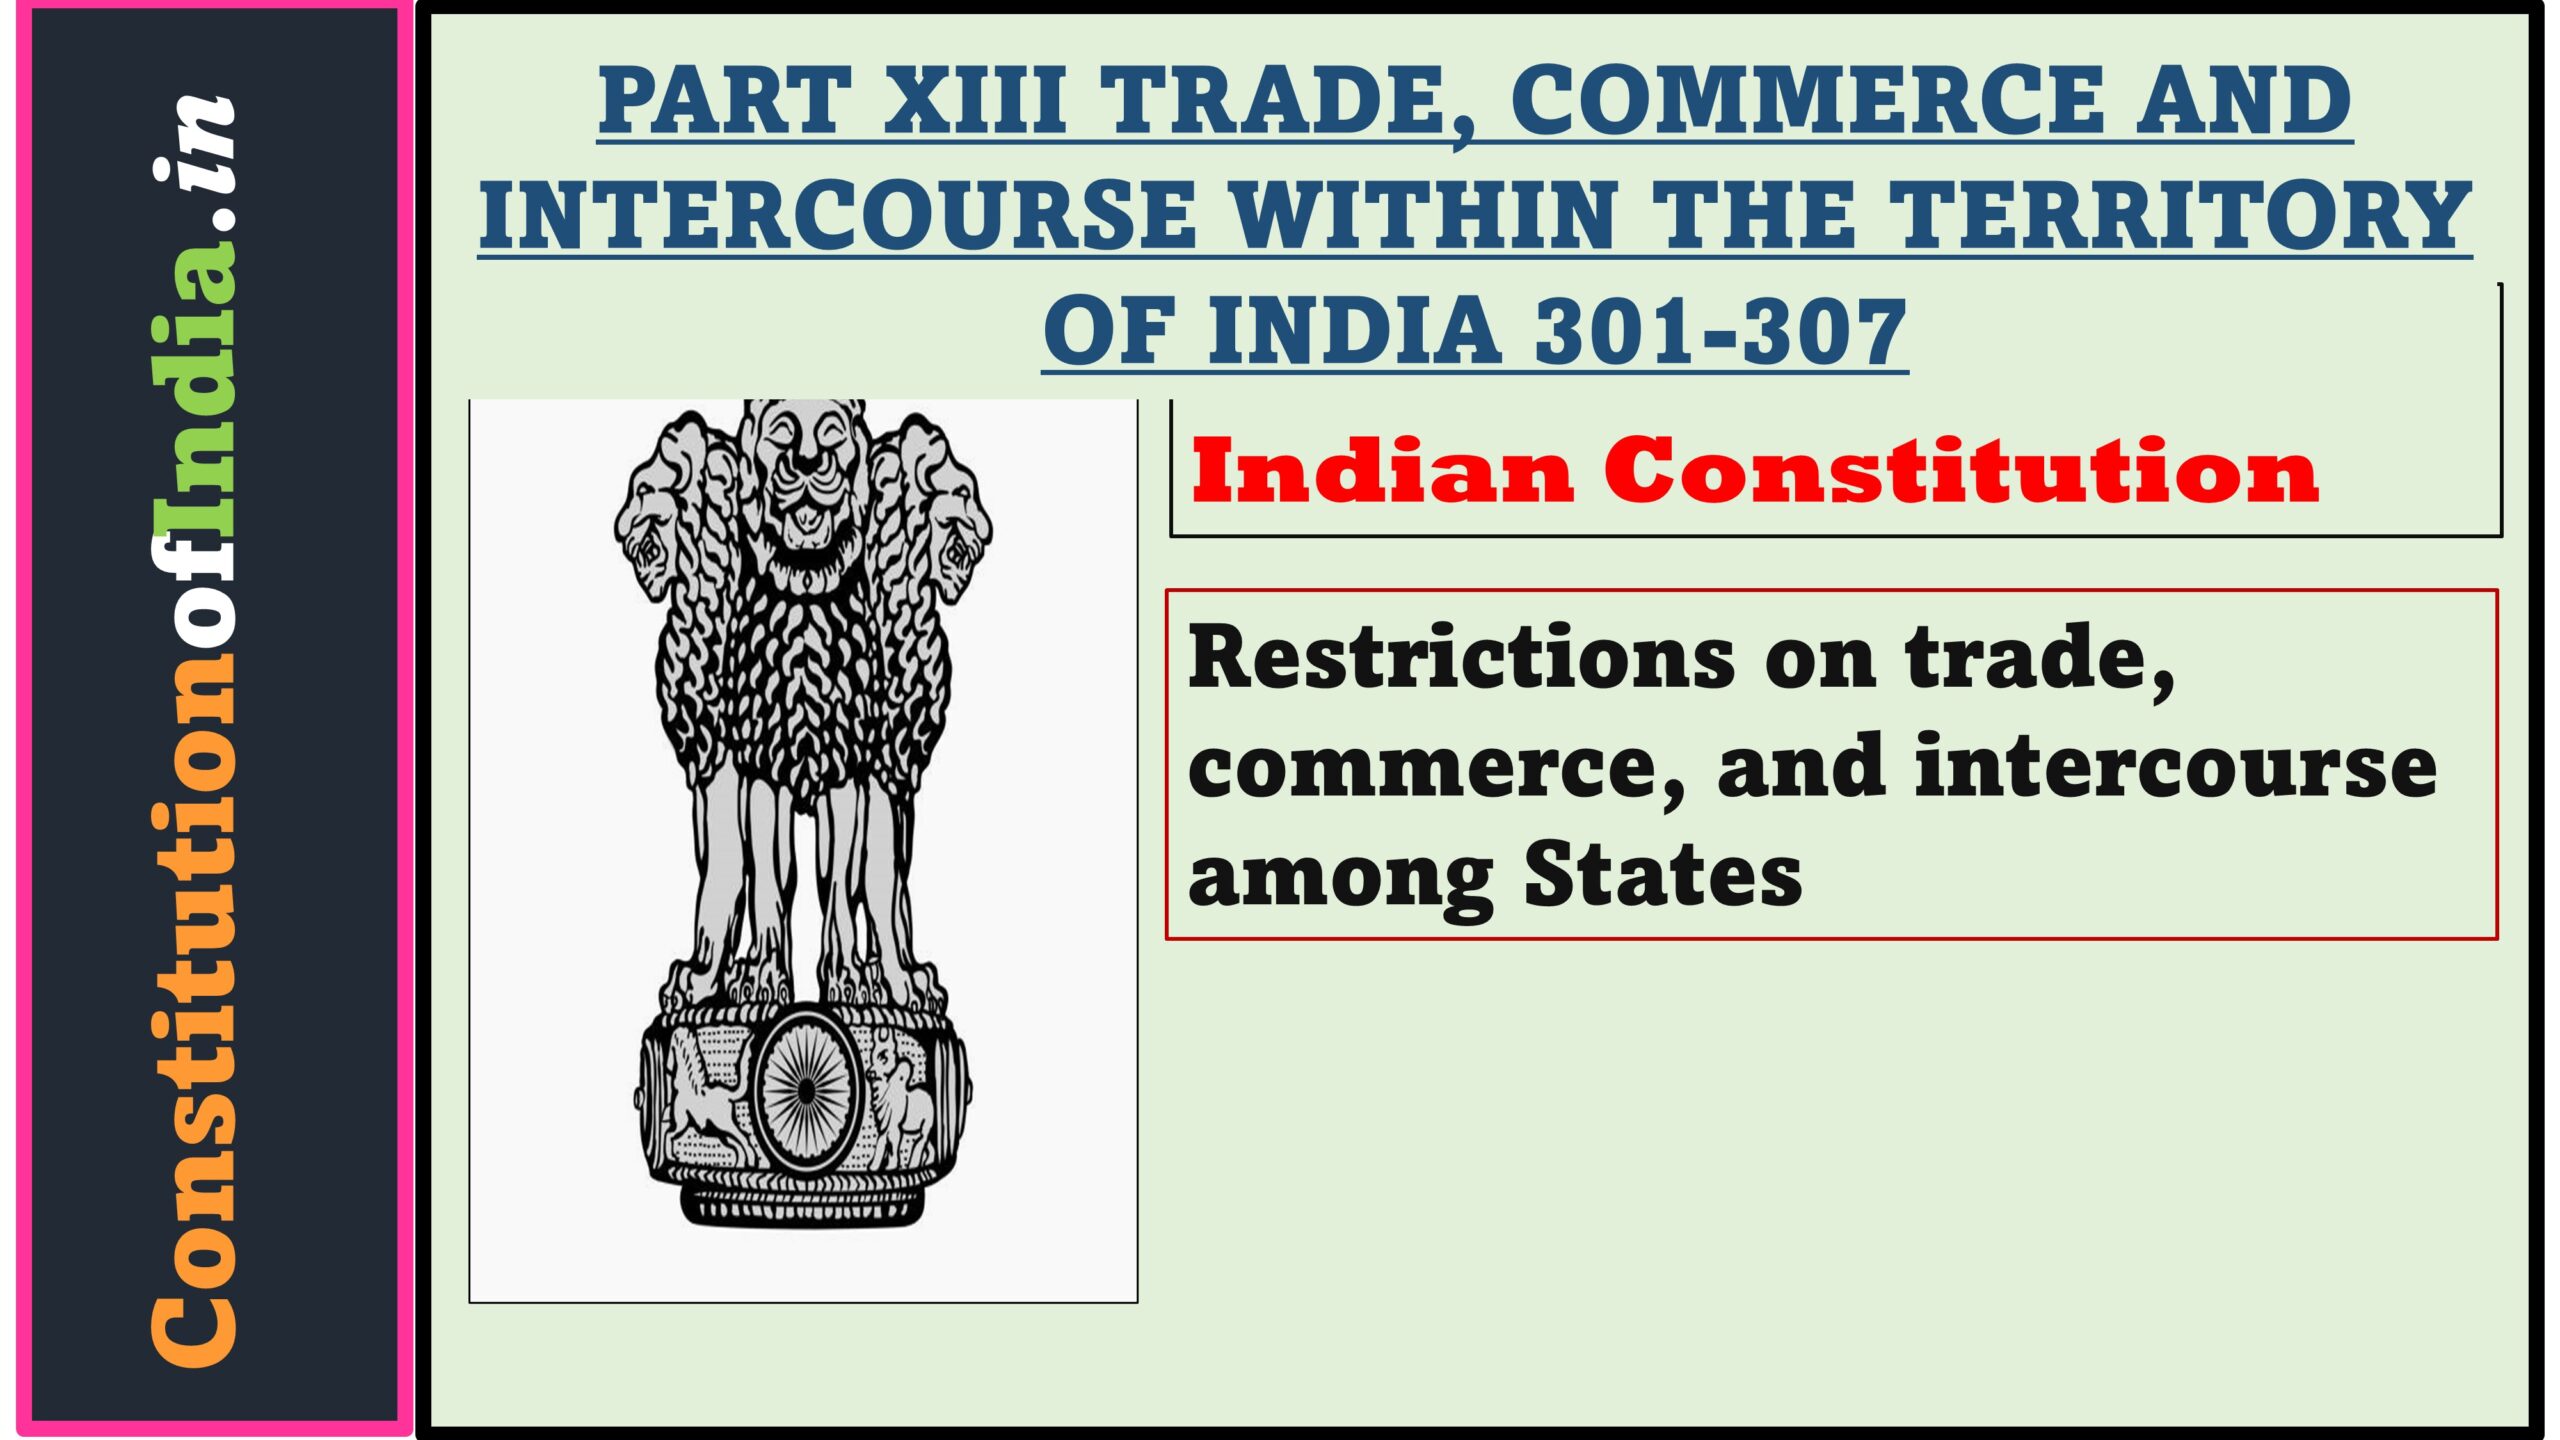 Article 304 of The Indian Constitution